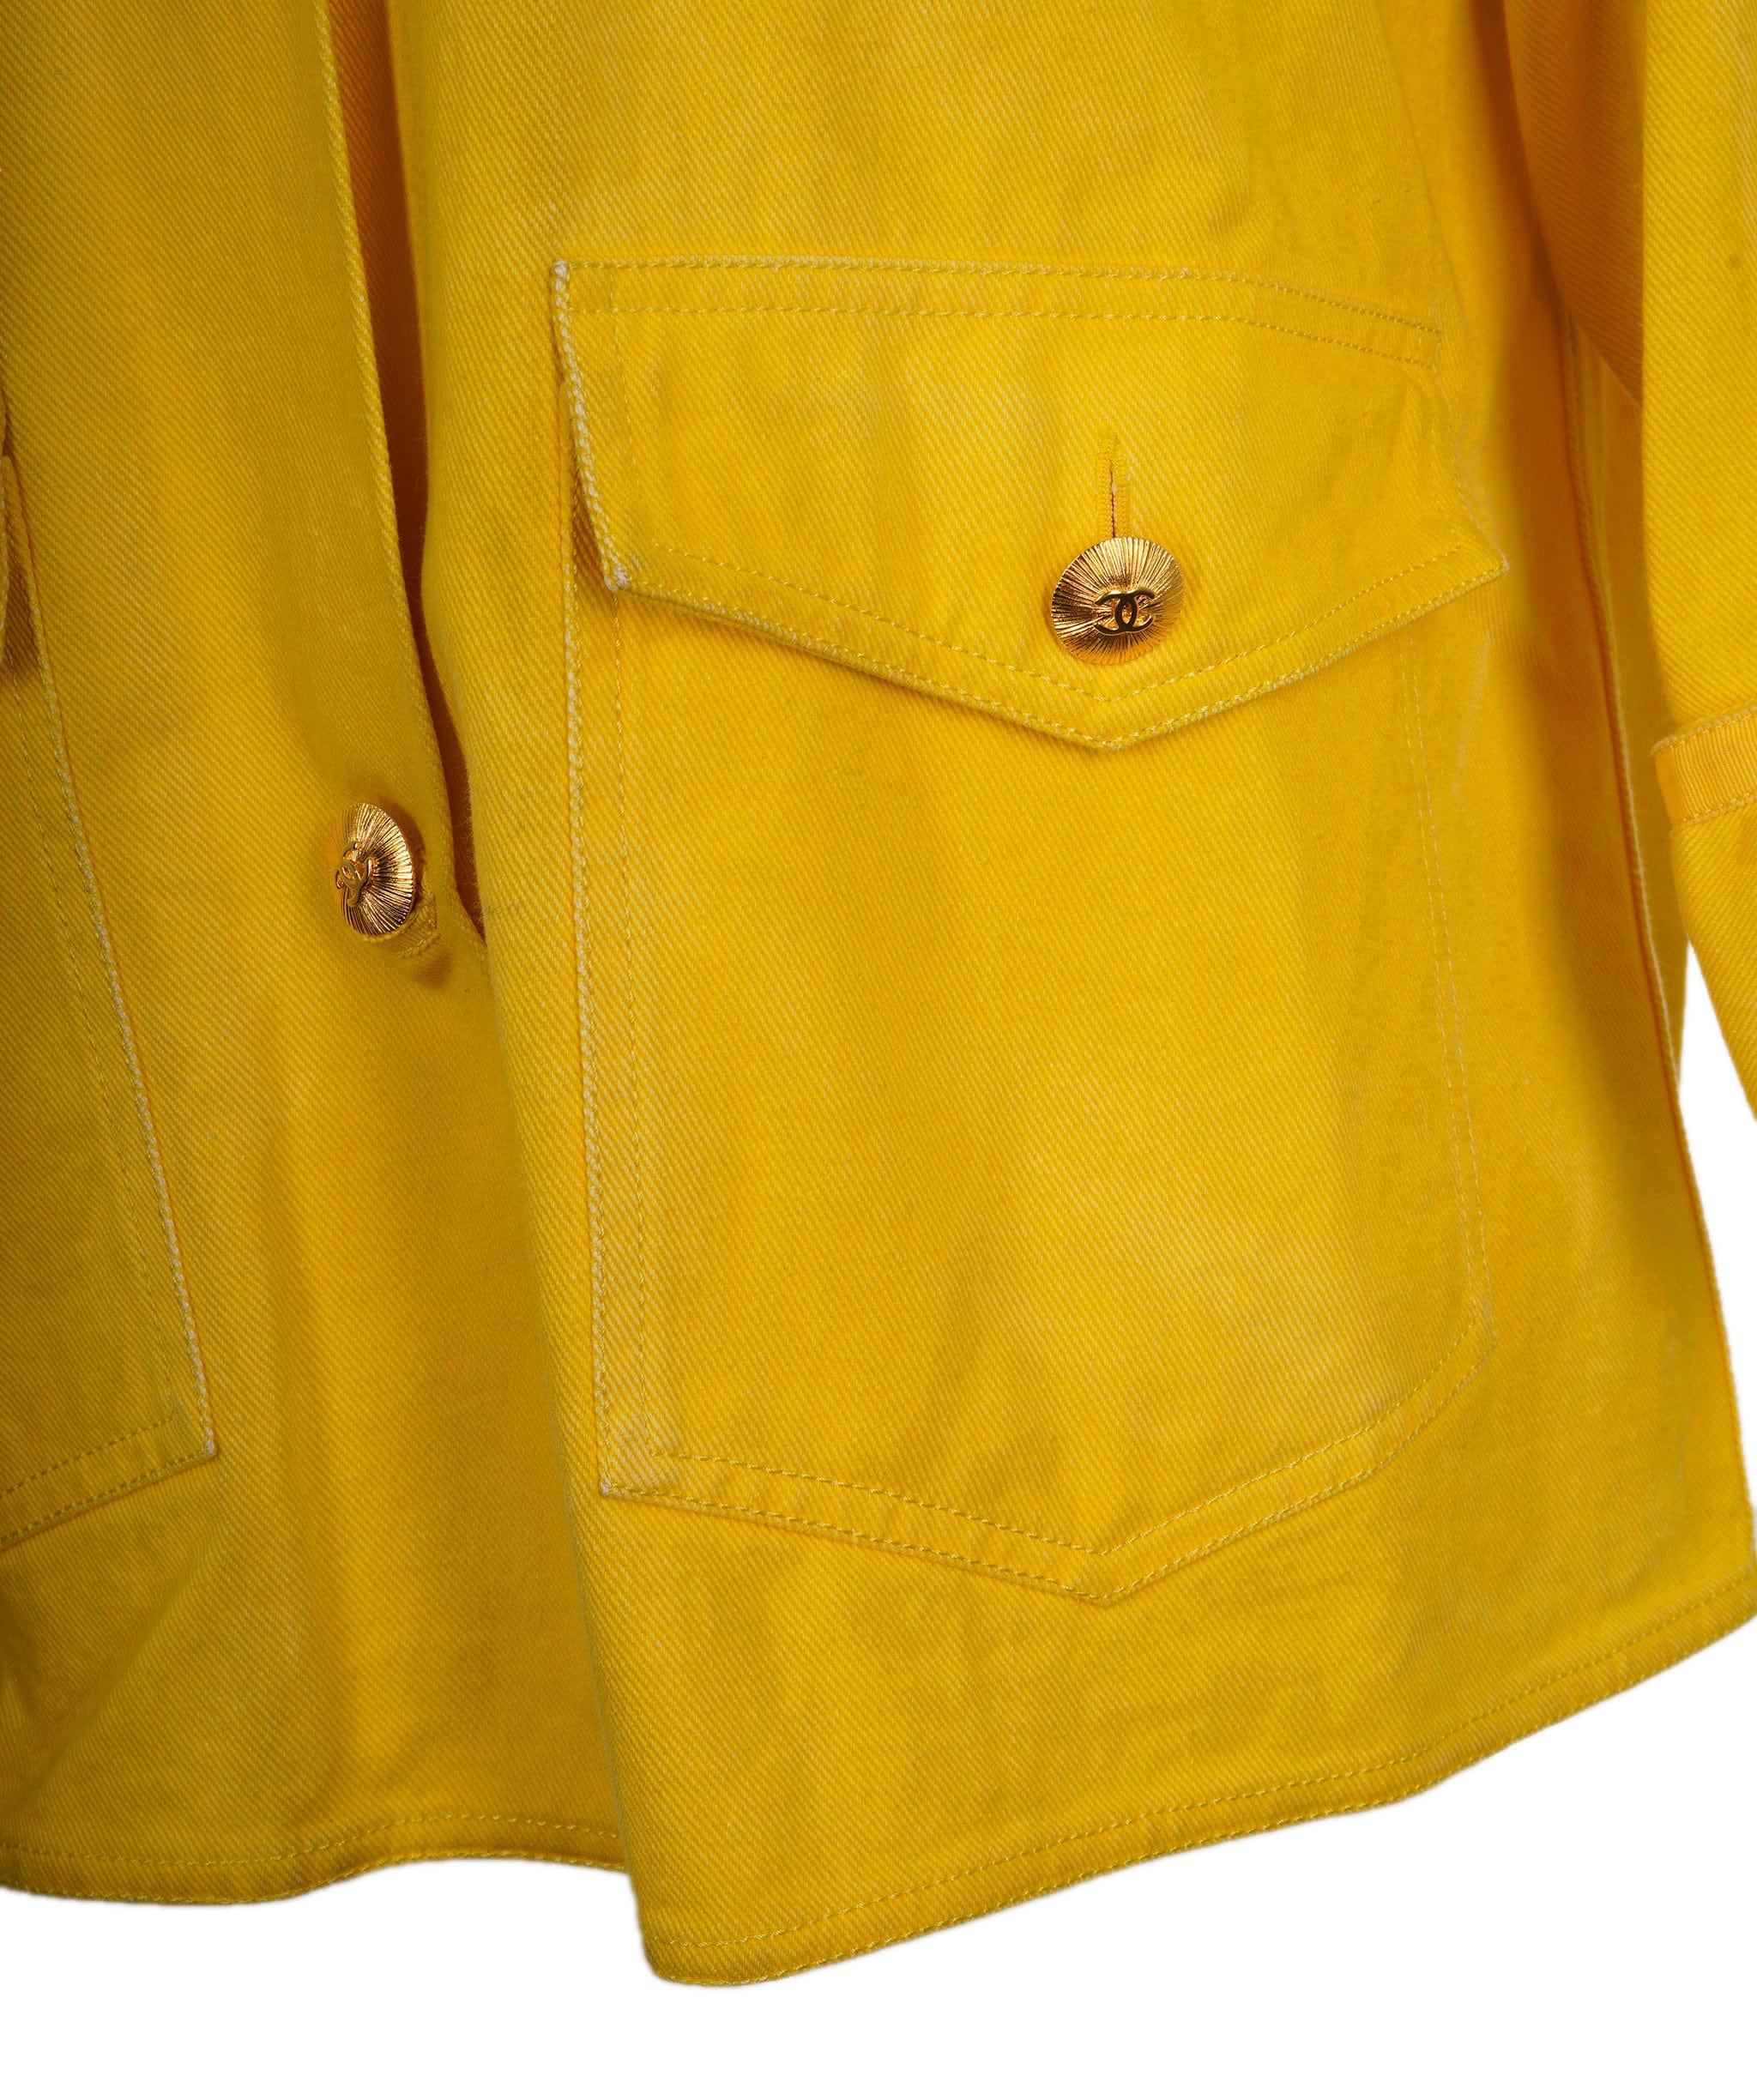 Chanel Chanel 00695 #40 CC Button Single Breasted Long Sleeve Coat Jacket Yellow 62982 66137 ASL9048